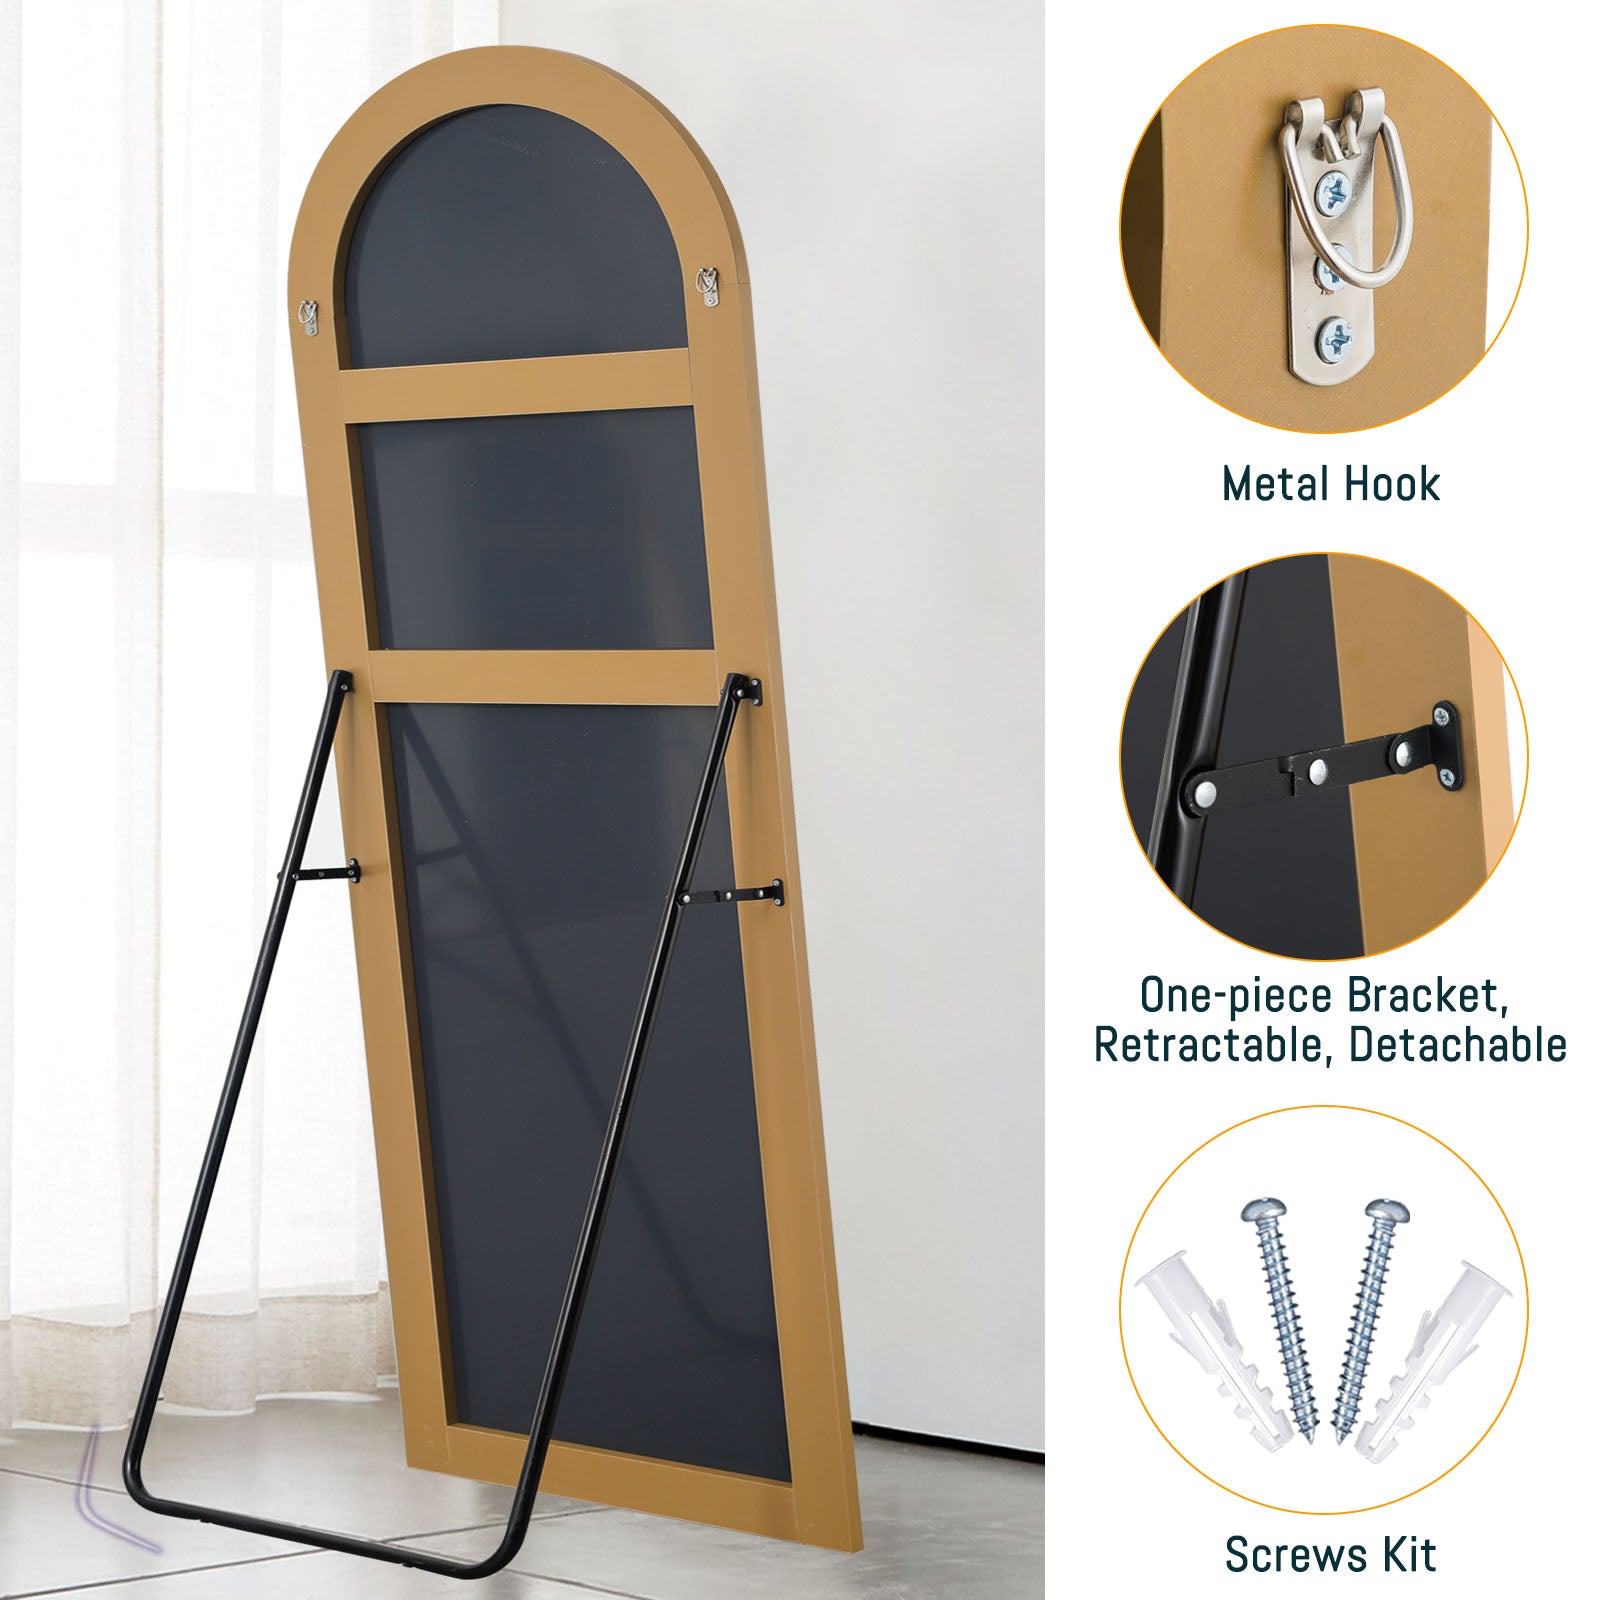 Arched-top full length mirror